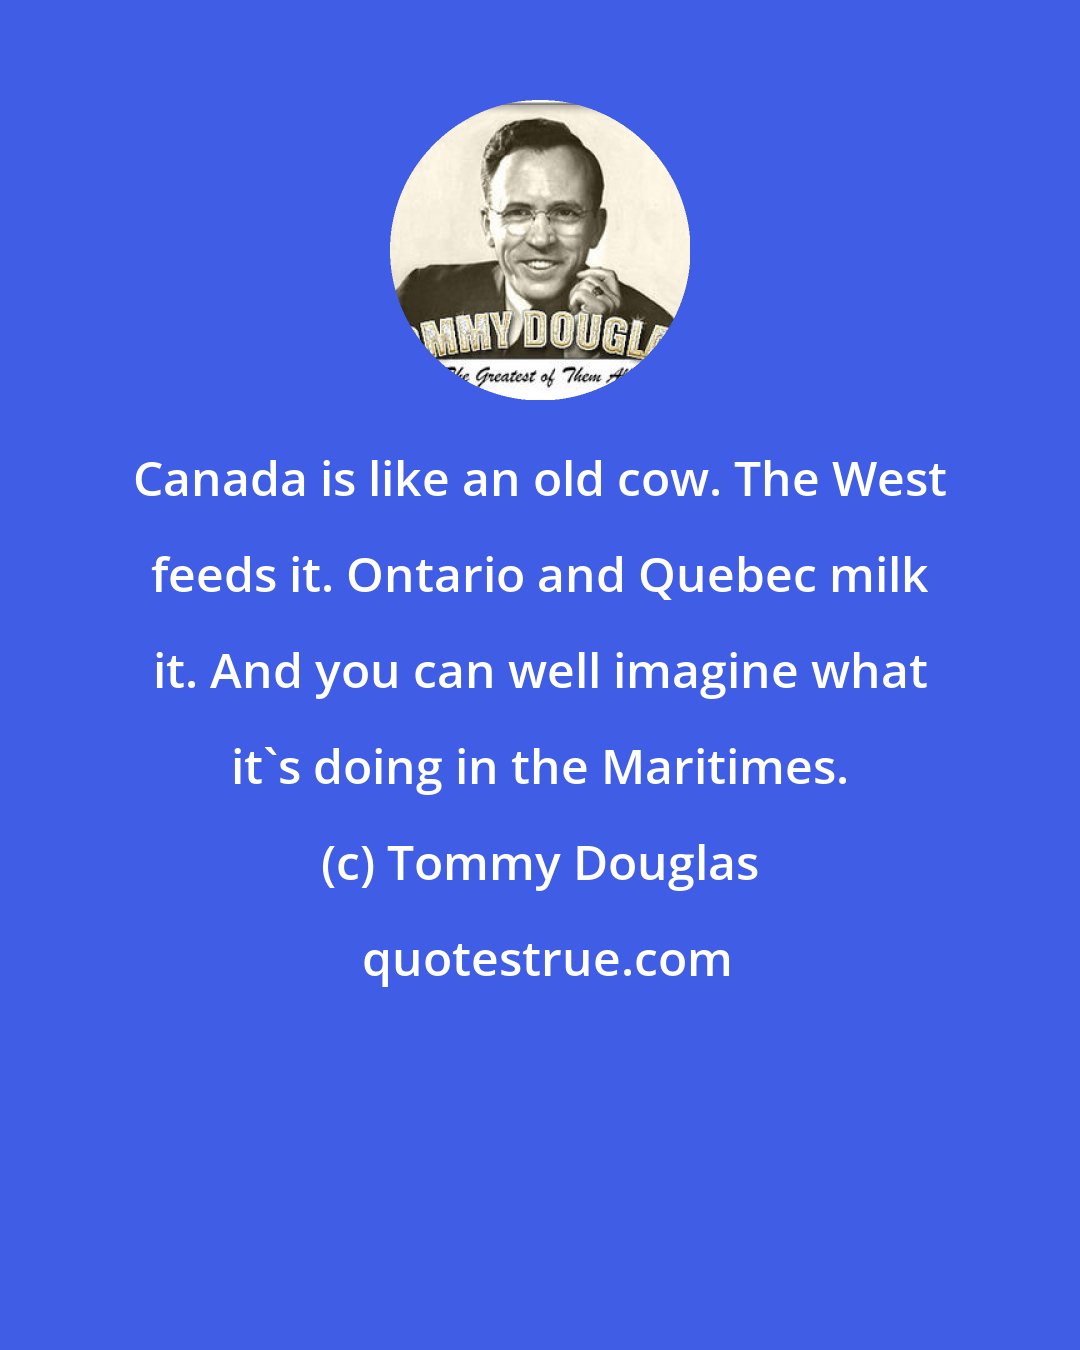 Tommy Douglas: Canada is like an old cow. The West feeds it. Ontario and Quebec milk it. And you can well imagine what it's doing in the Maritimes.